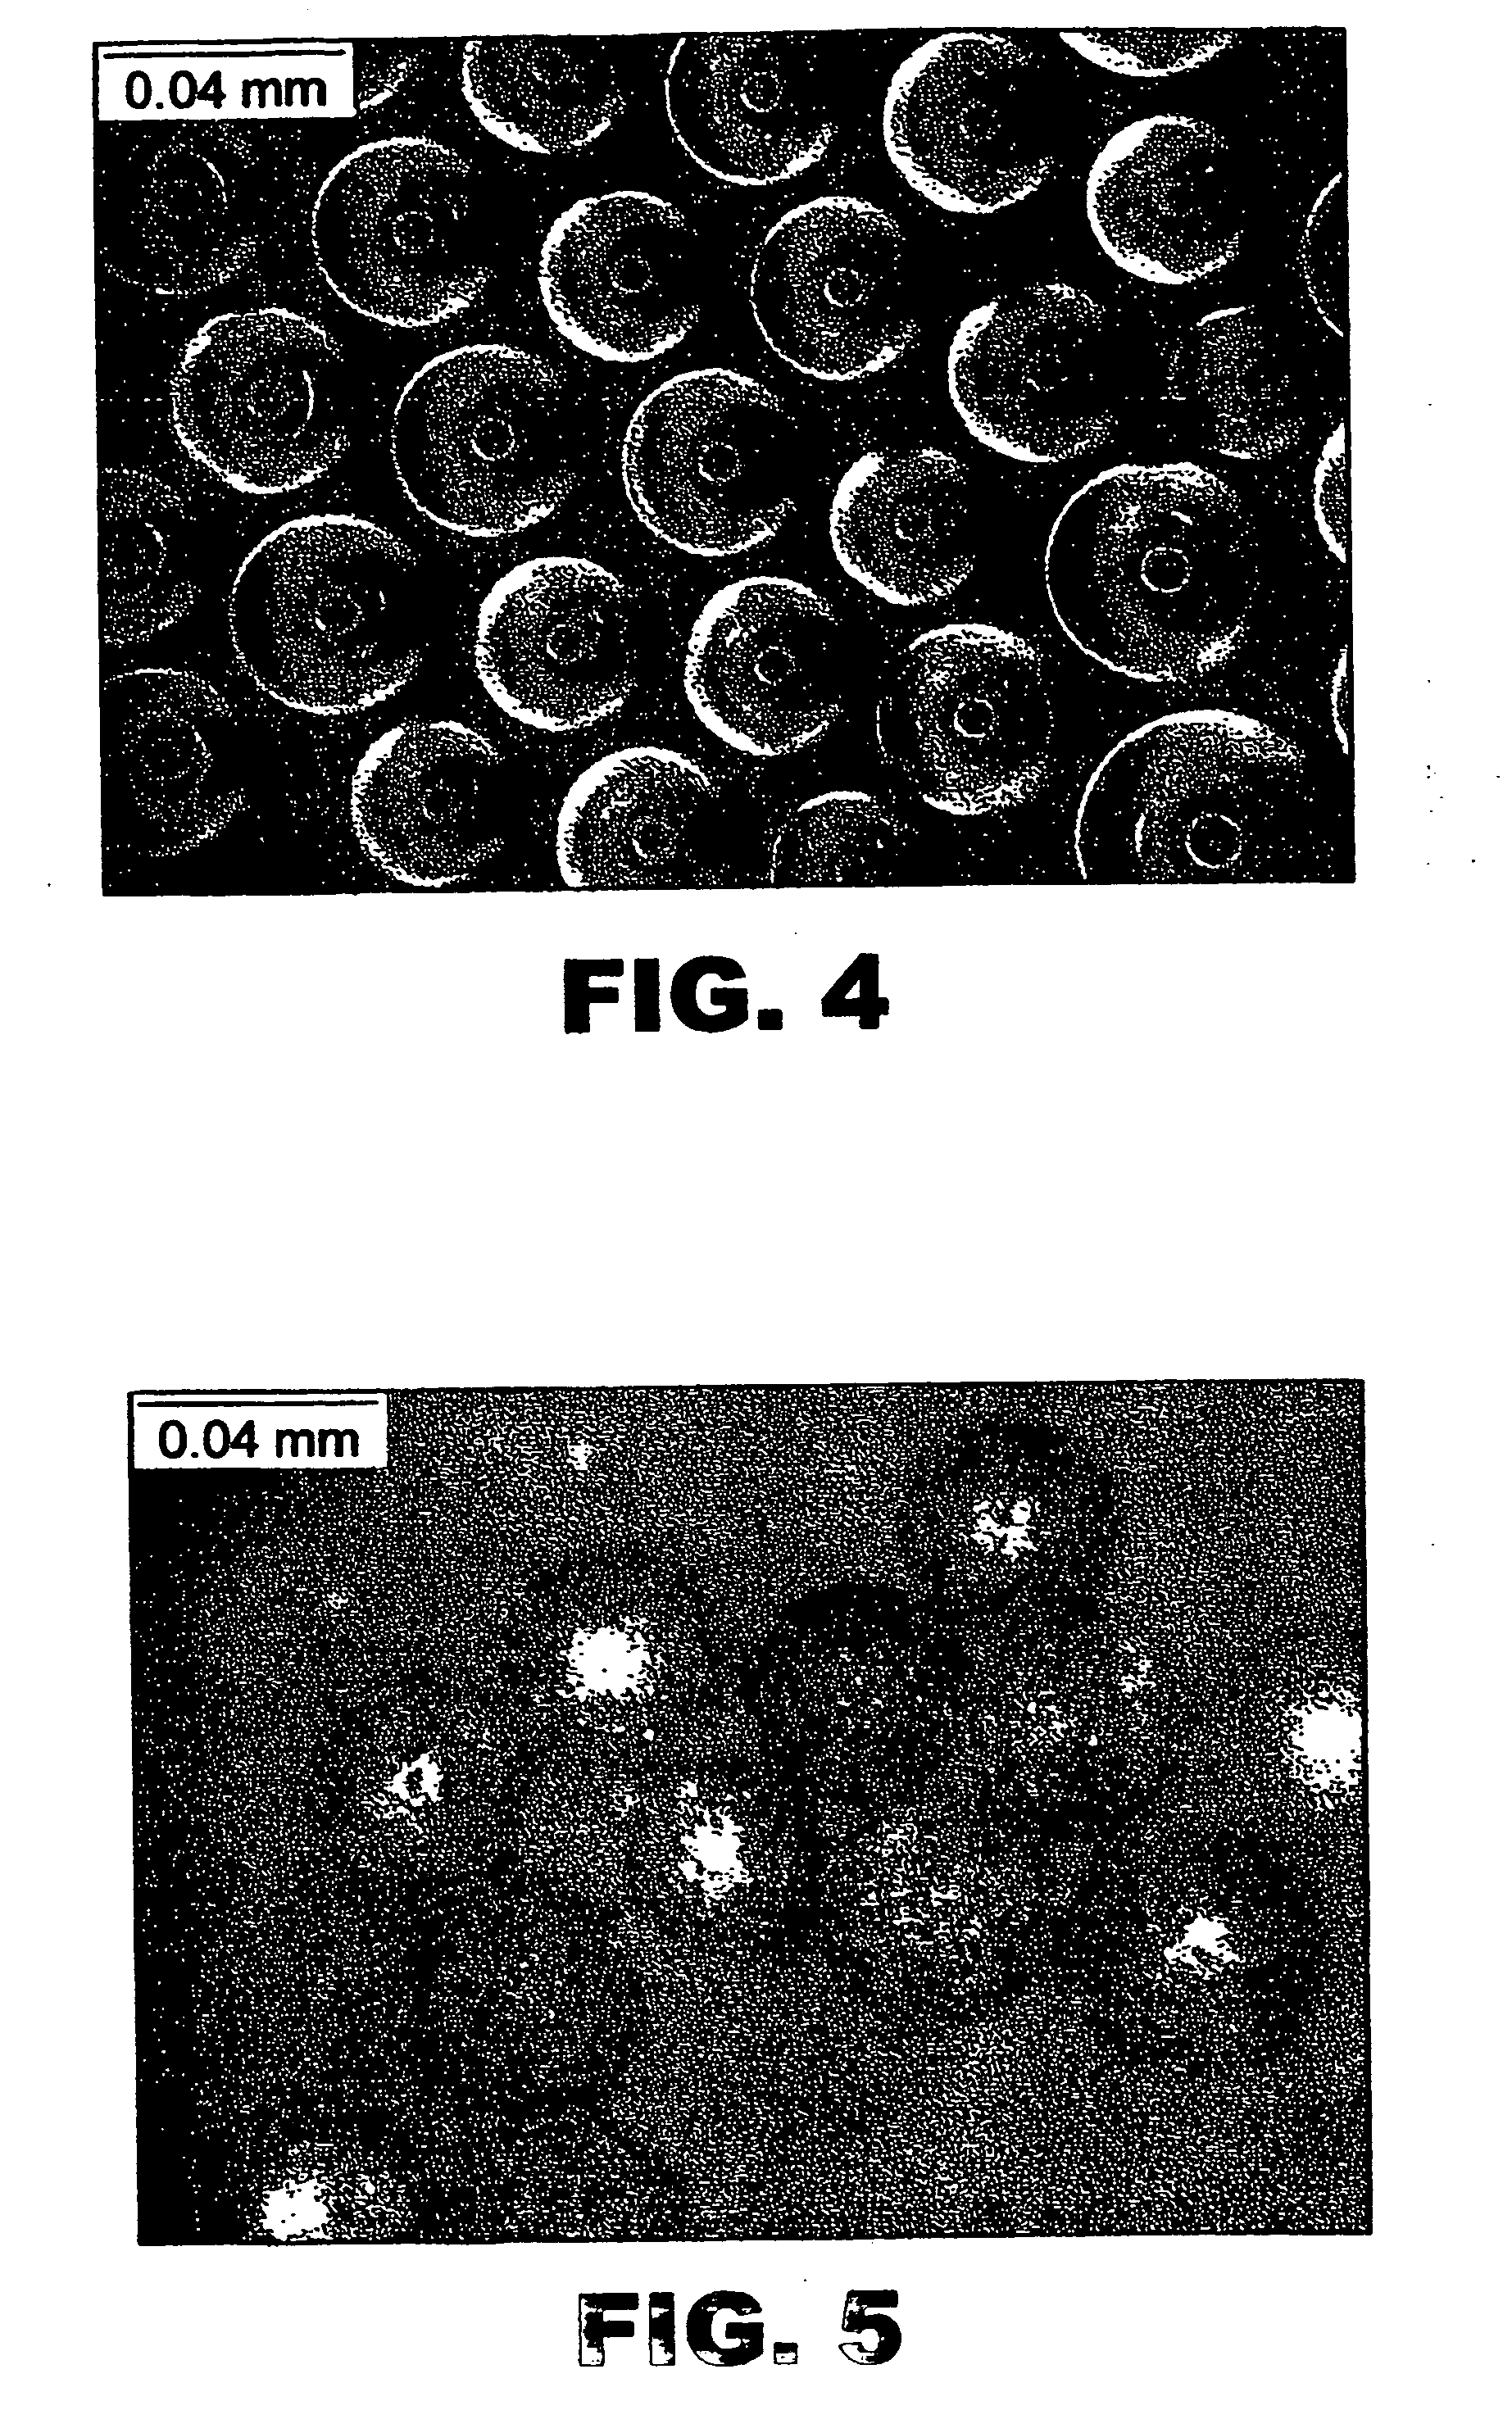 Method for treating contaminated water